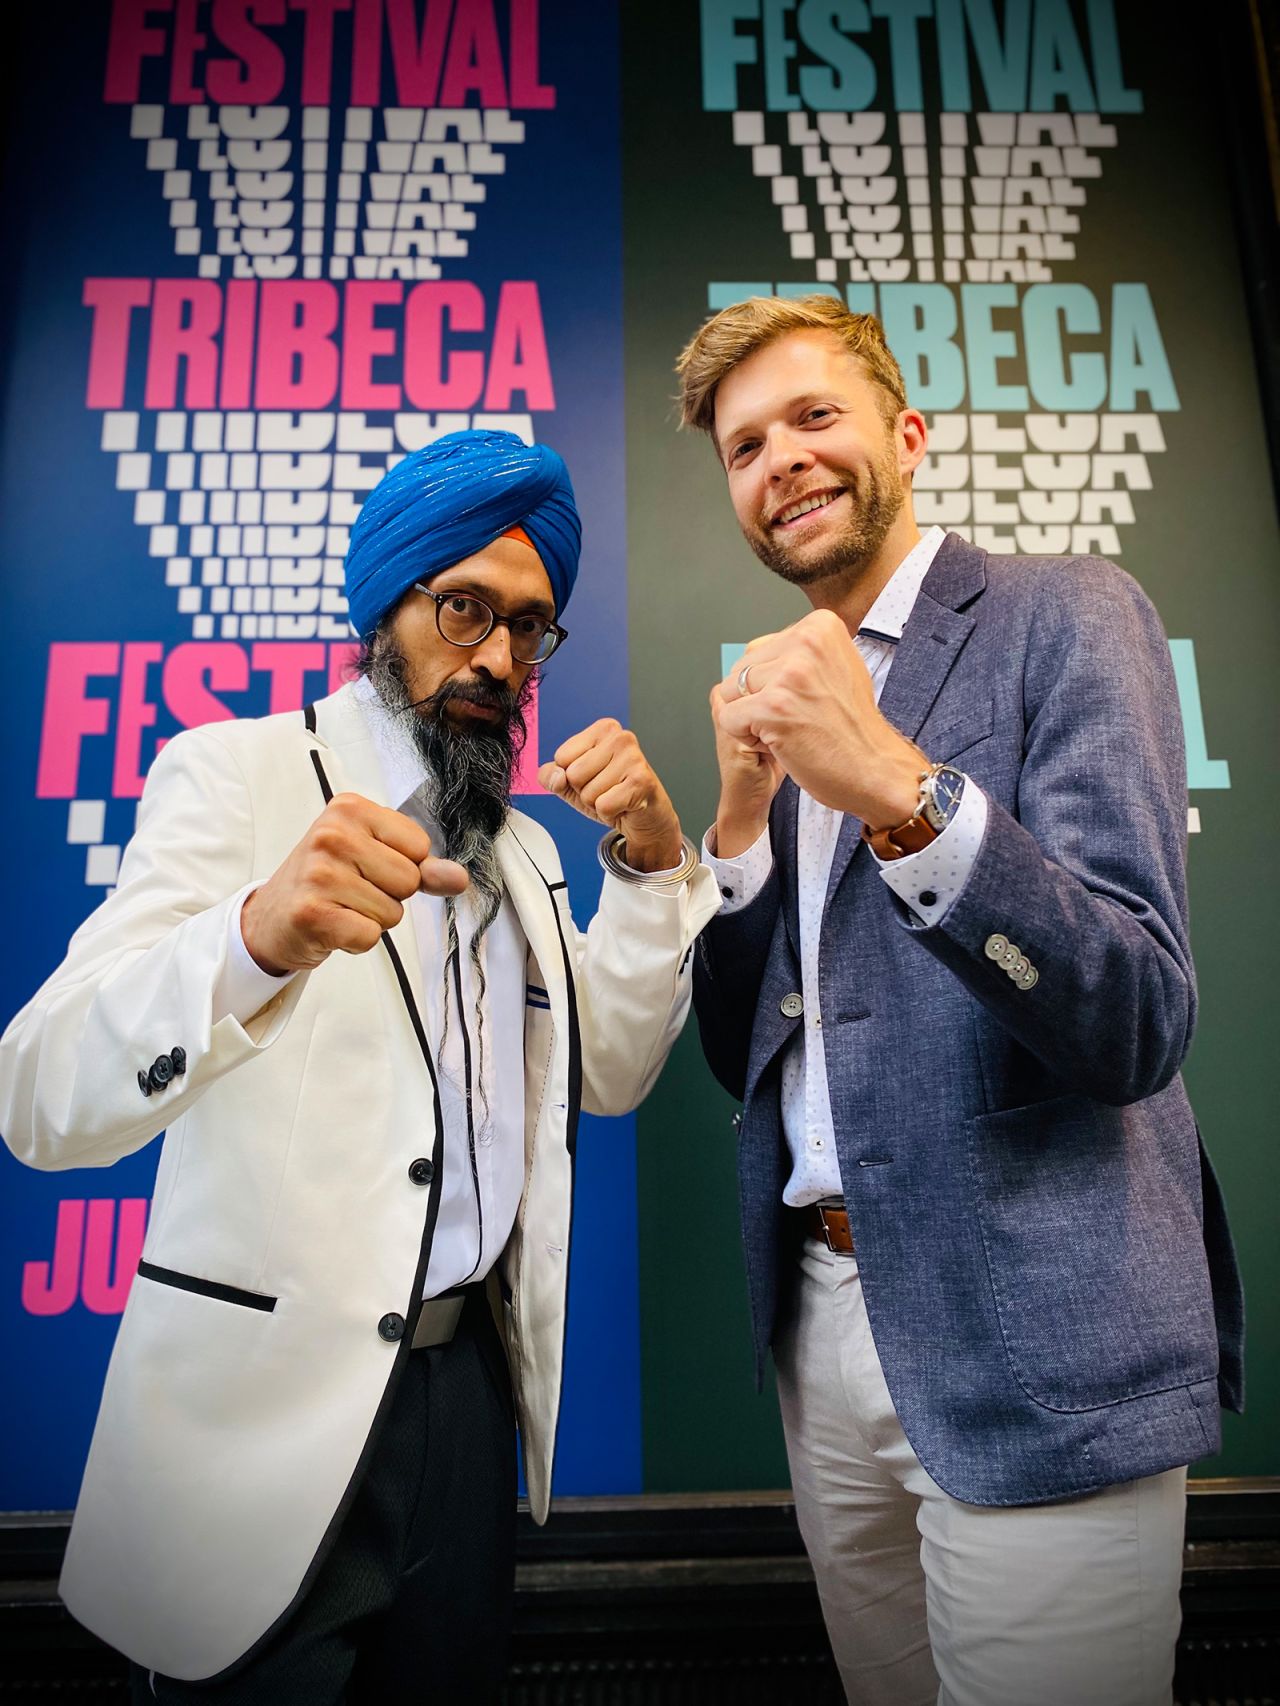 Singh and Westra, co-directors of the animated short film "American Sikh," said they wanted to counter the lack of positive Sikh representation in media.